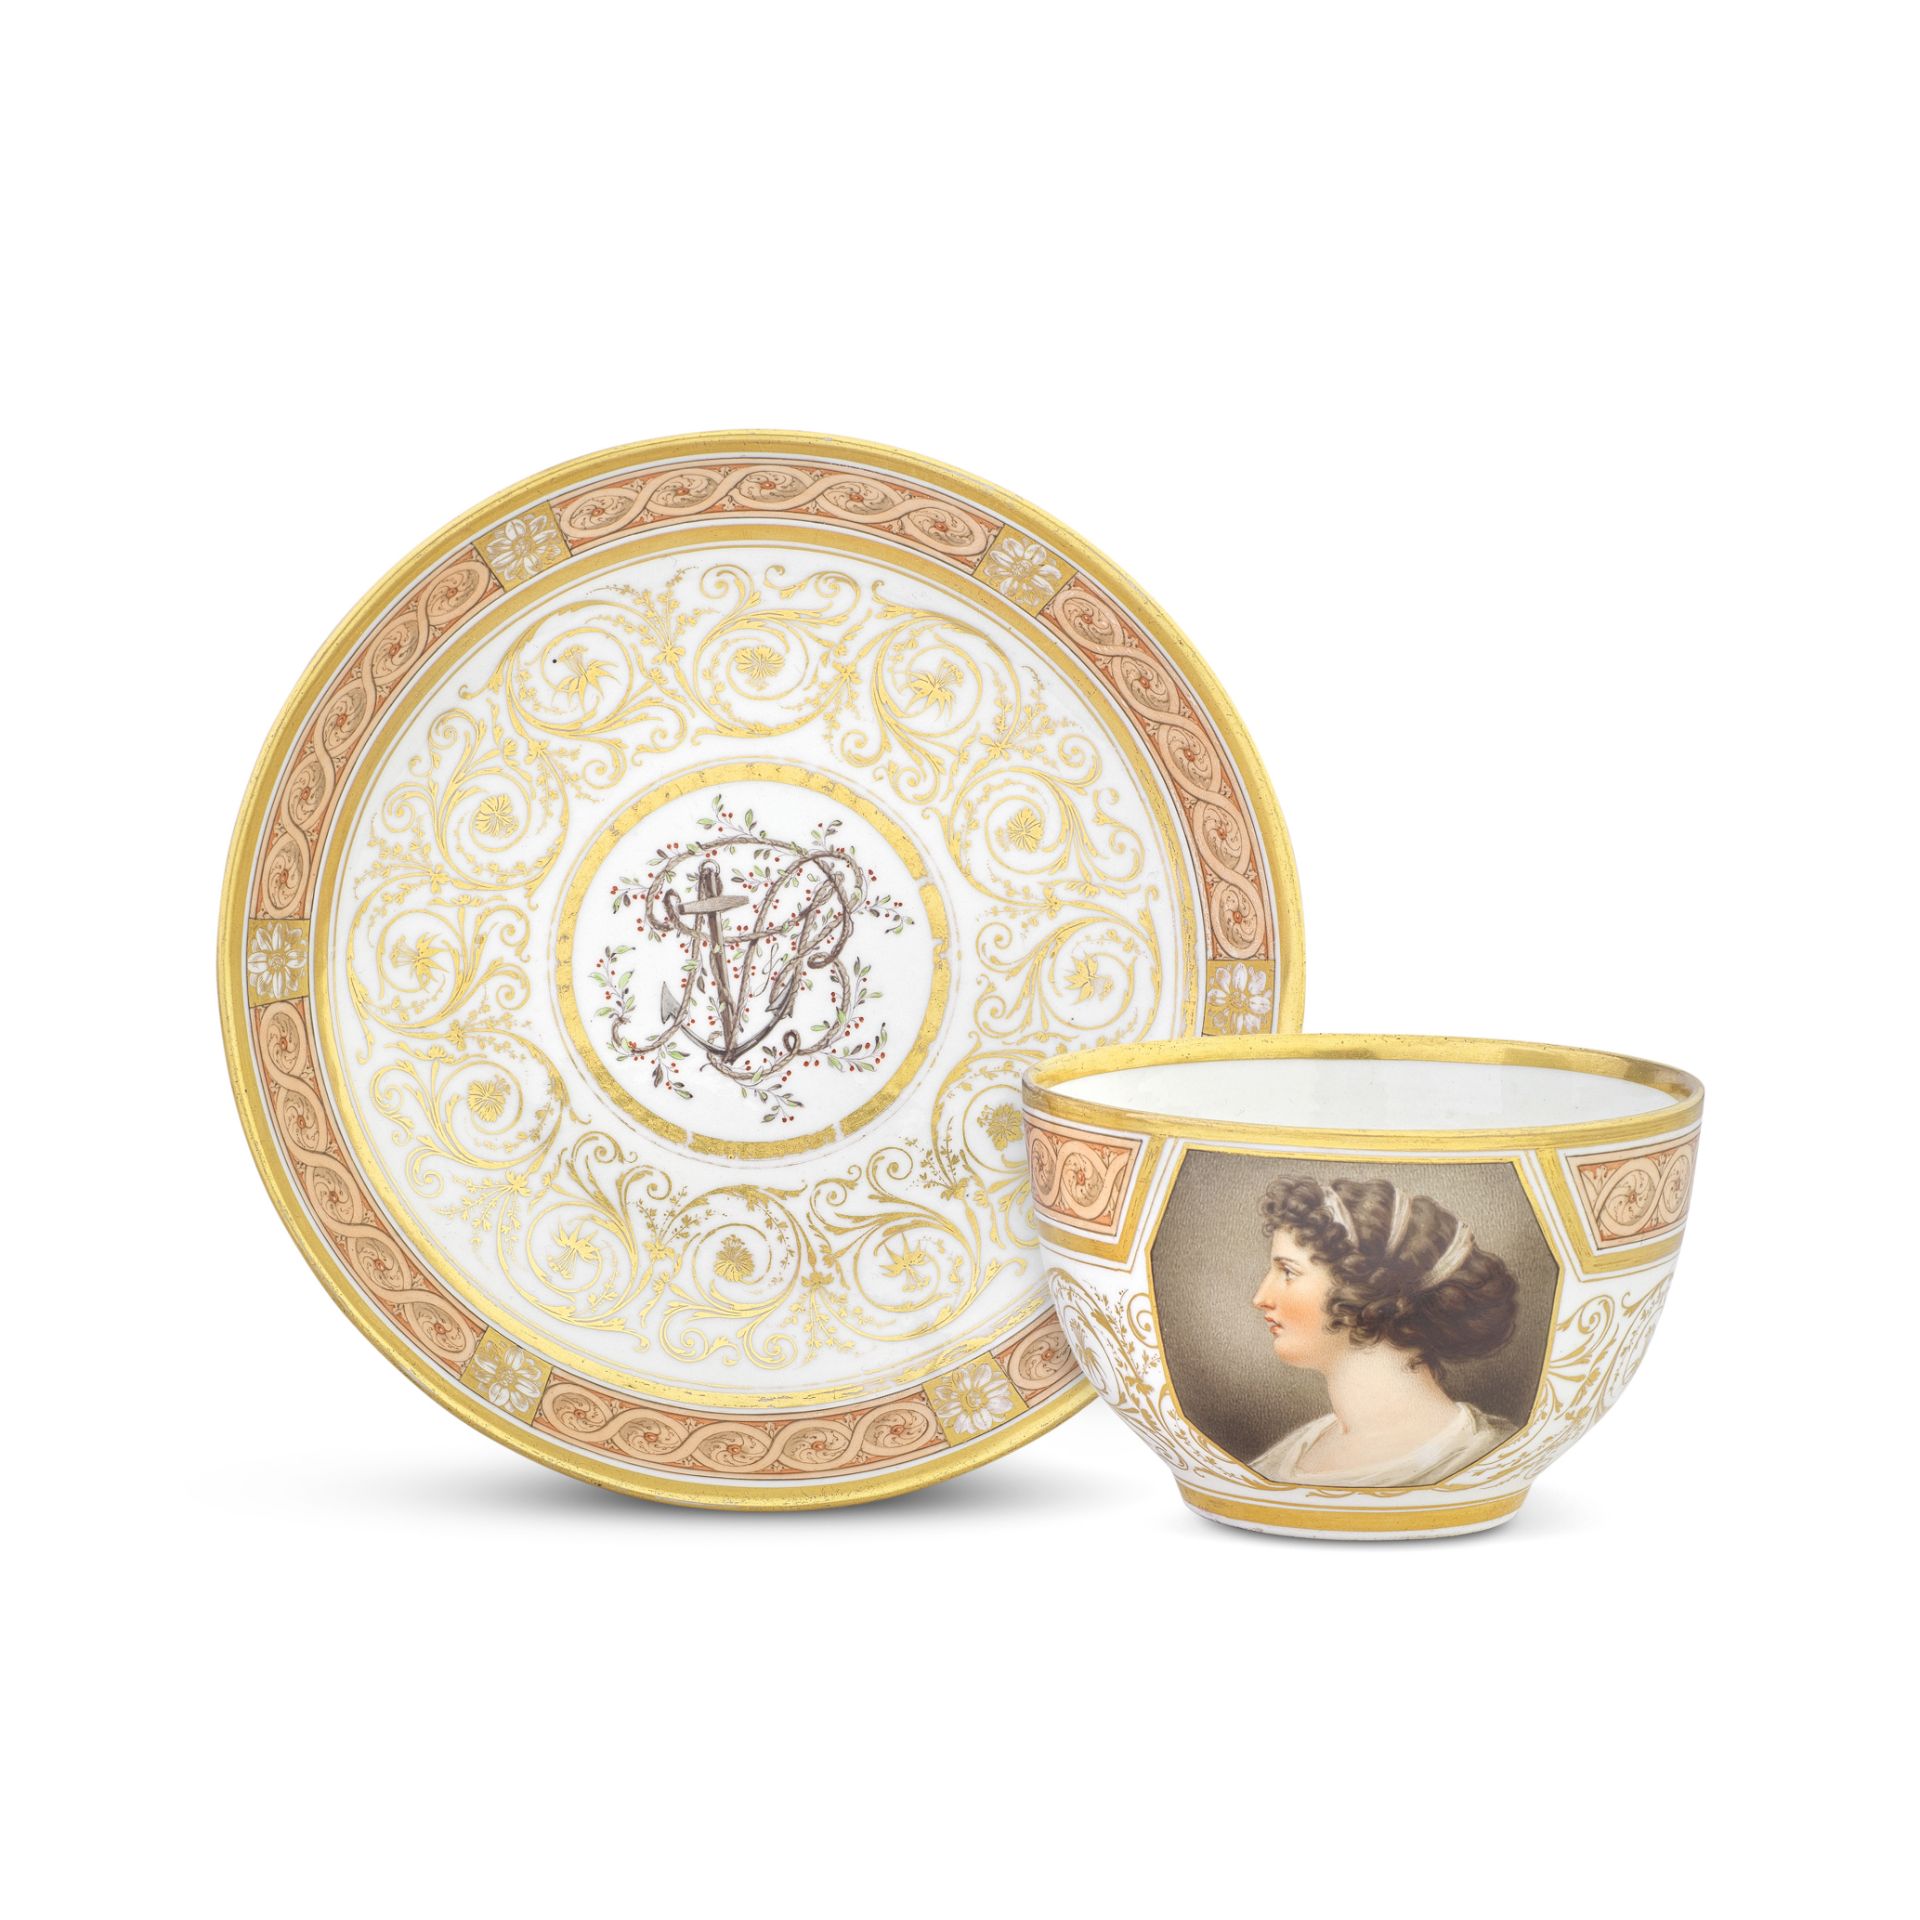 Nelson and Emma: An important Coalport cup and saucer by Thomas Baxter, dated 1804